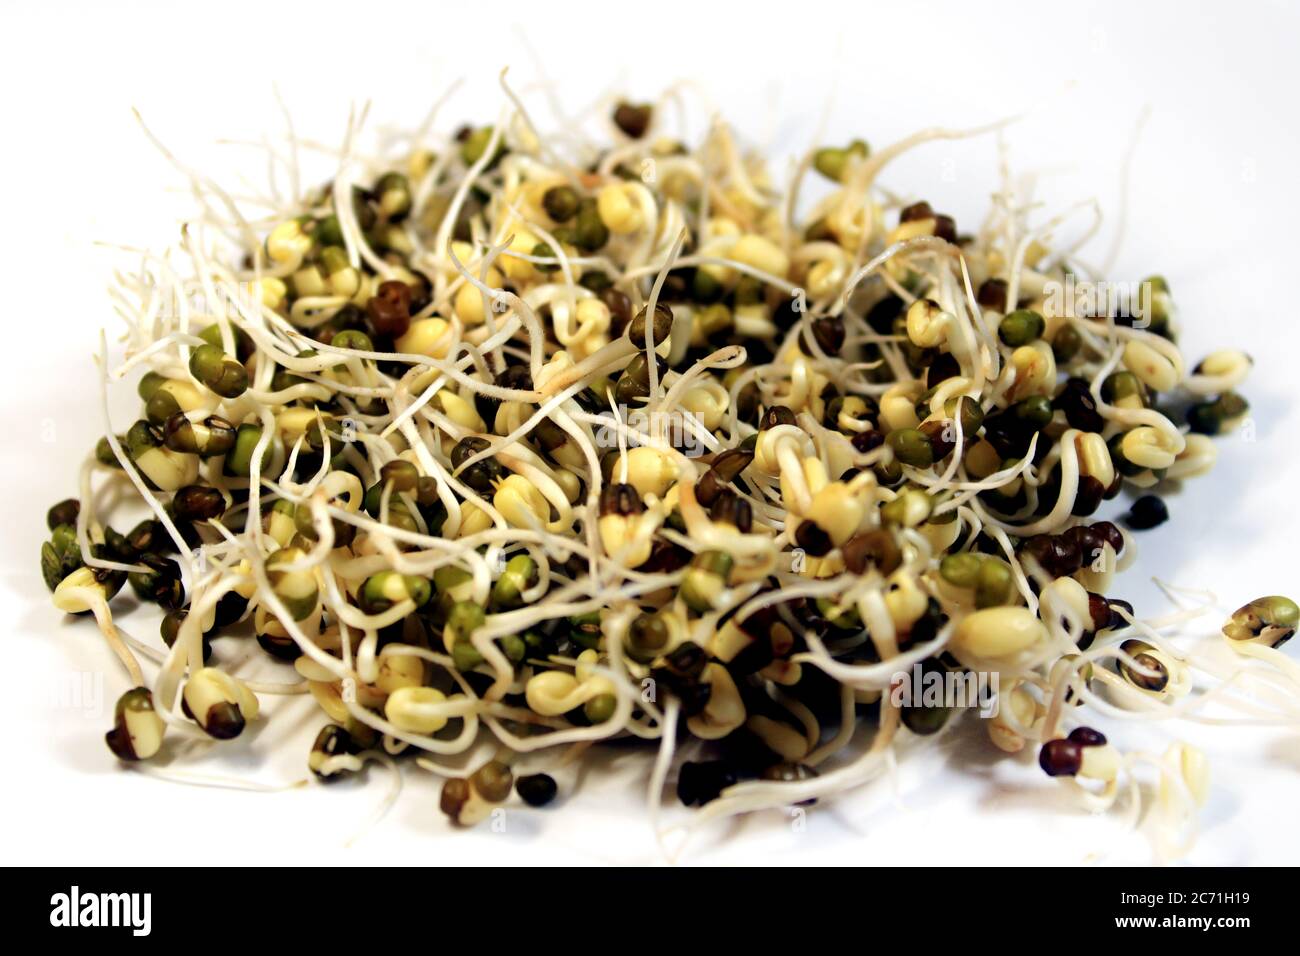 Fresh Sprouted green gram isolated with white background. Fresh, healthy sprouted mung dal or moong beans. Stock Photo